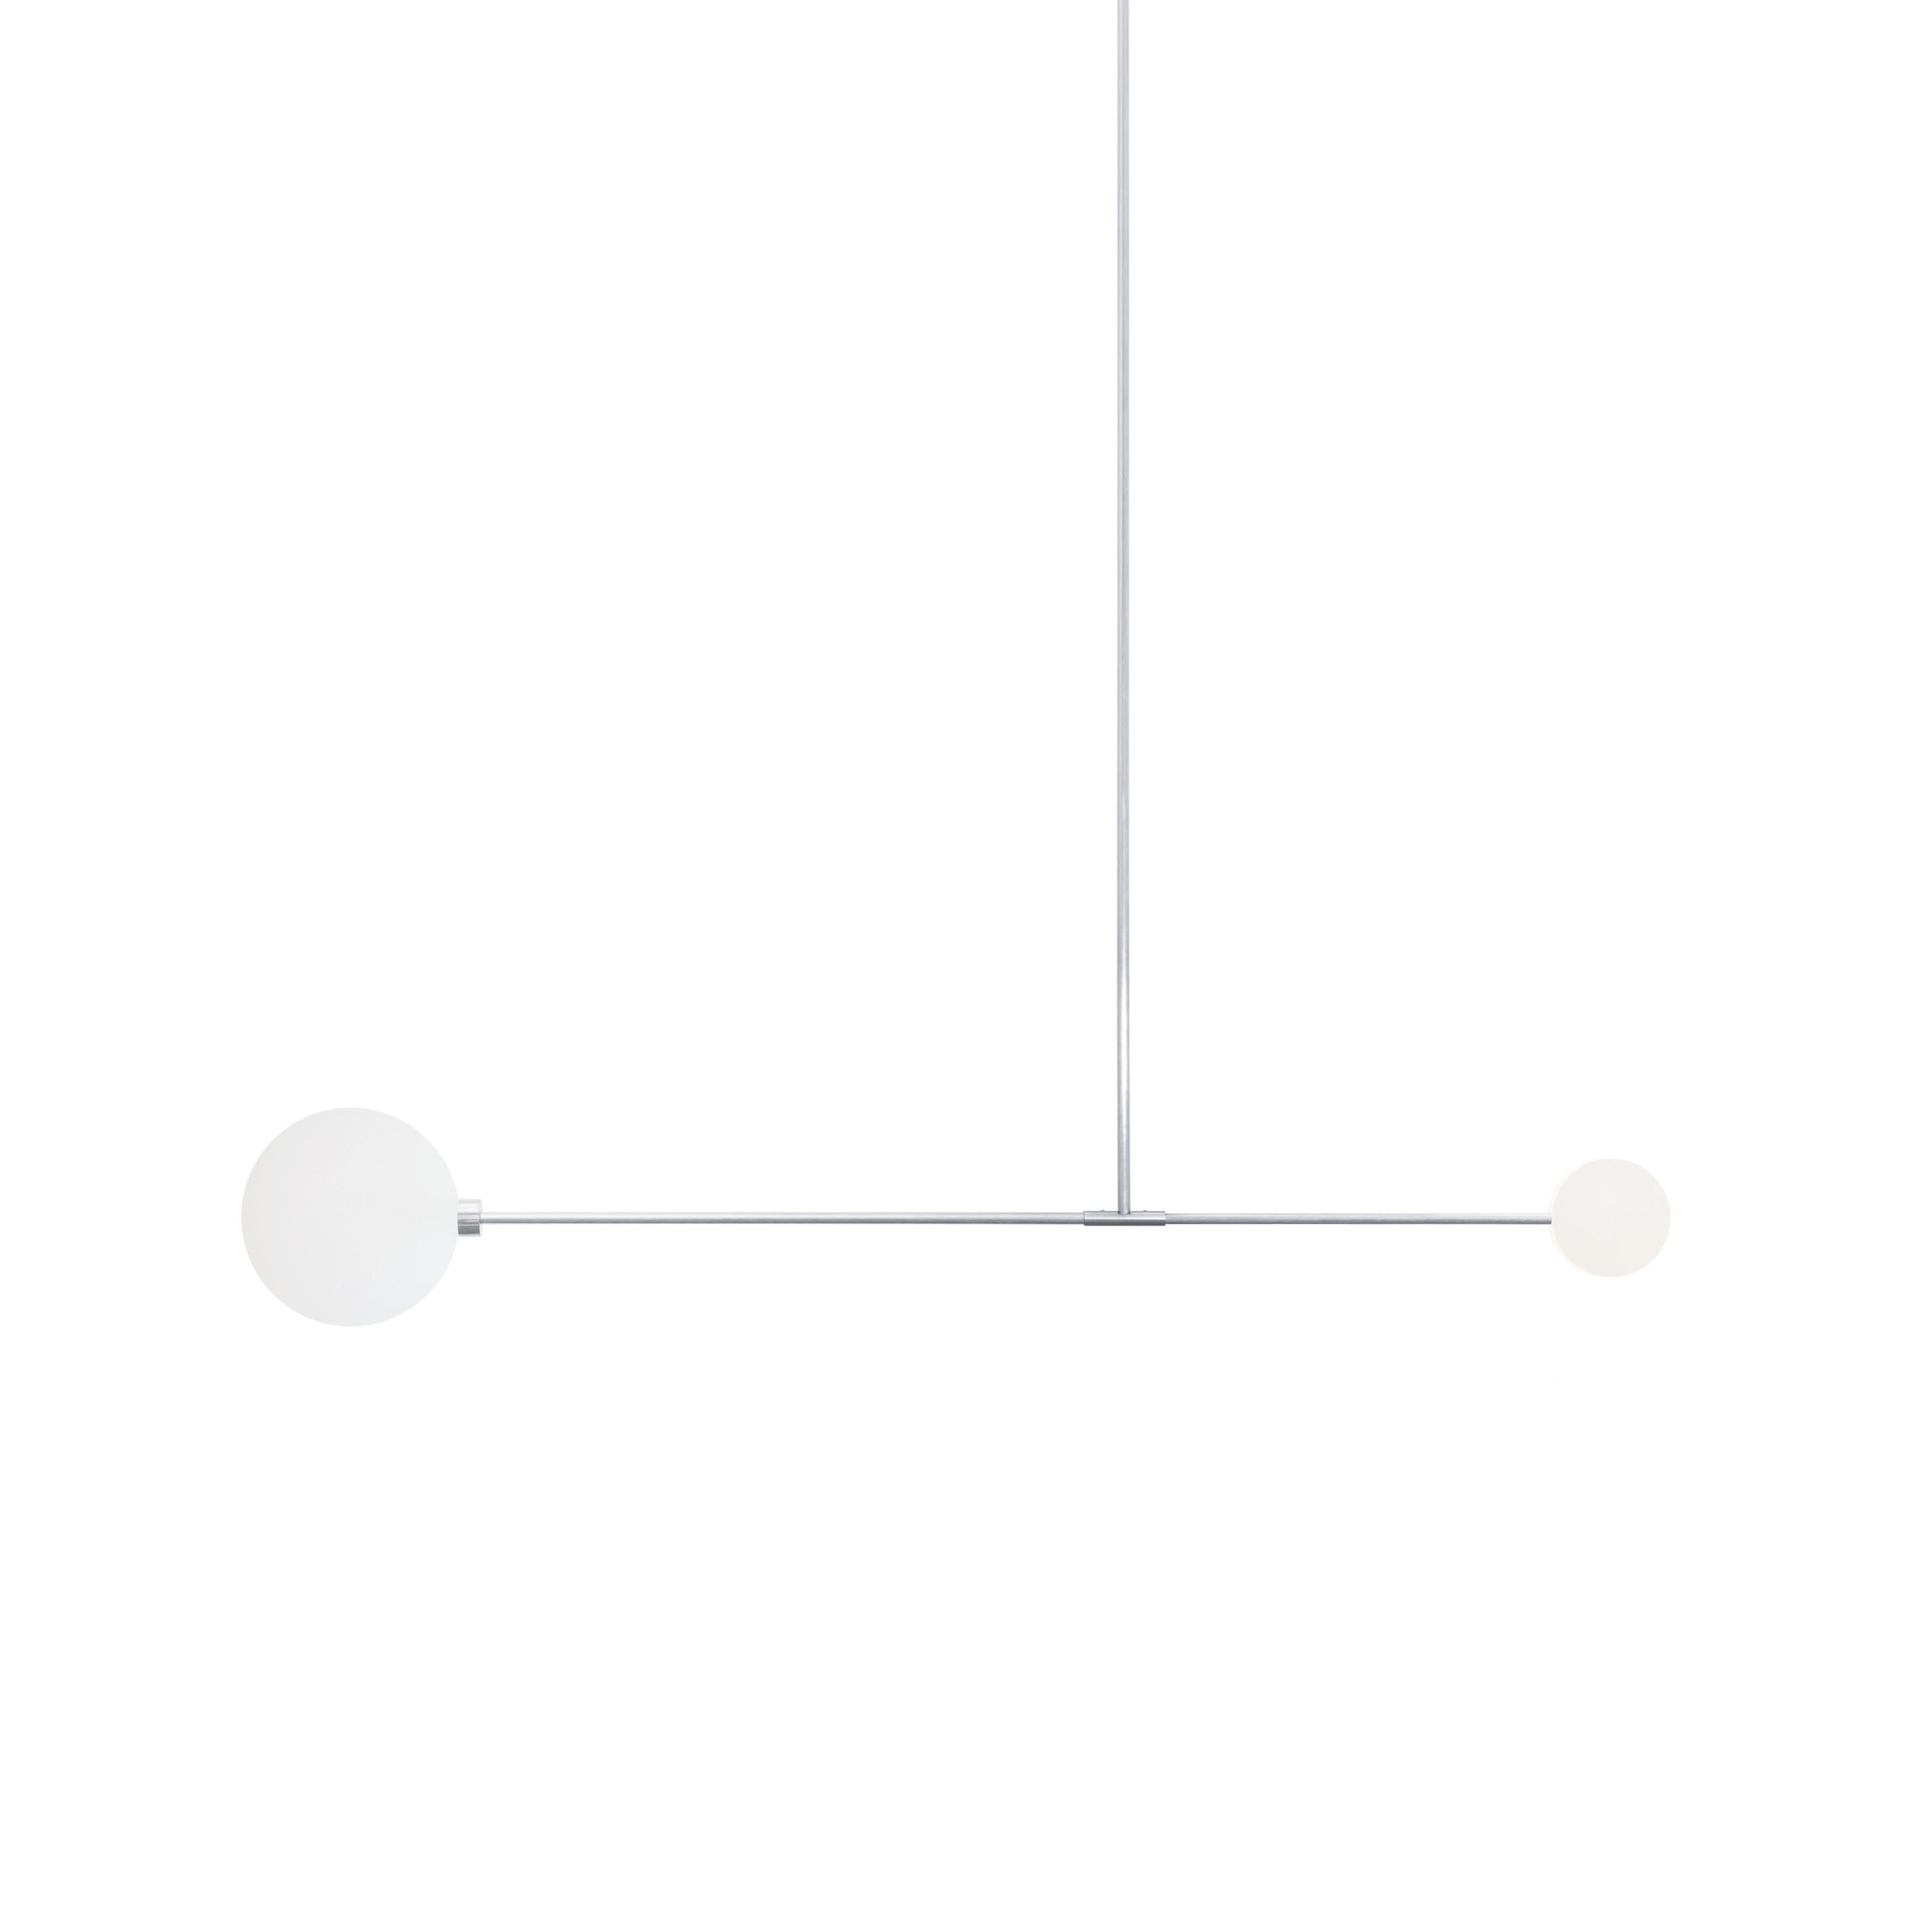 Copper/White Marble Linea Disc Light by Atris
Materials: copper, white marble, satin glass
Also available in steel and brass.
Dimensions: H 40-100 x D 140 cm

We are the preachers of honest design, and we like to emphasize the beauty of natural